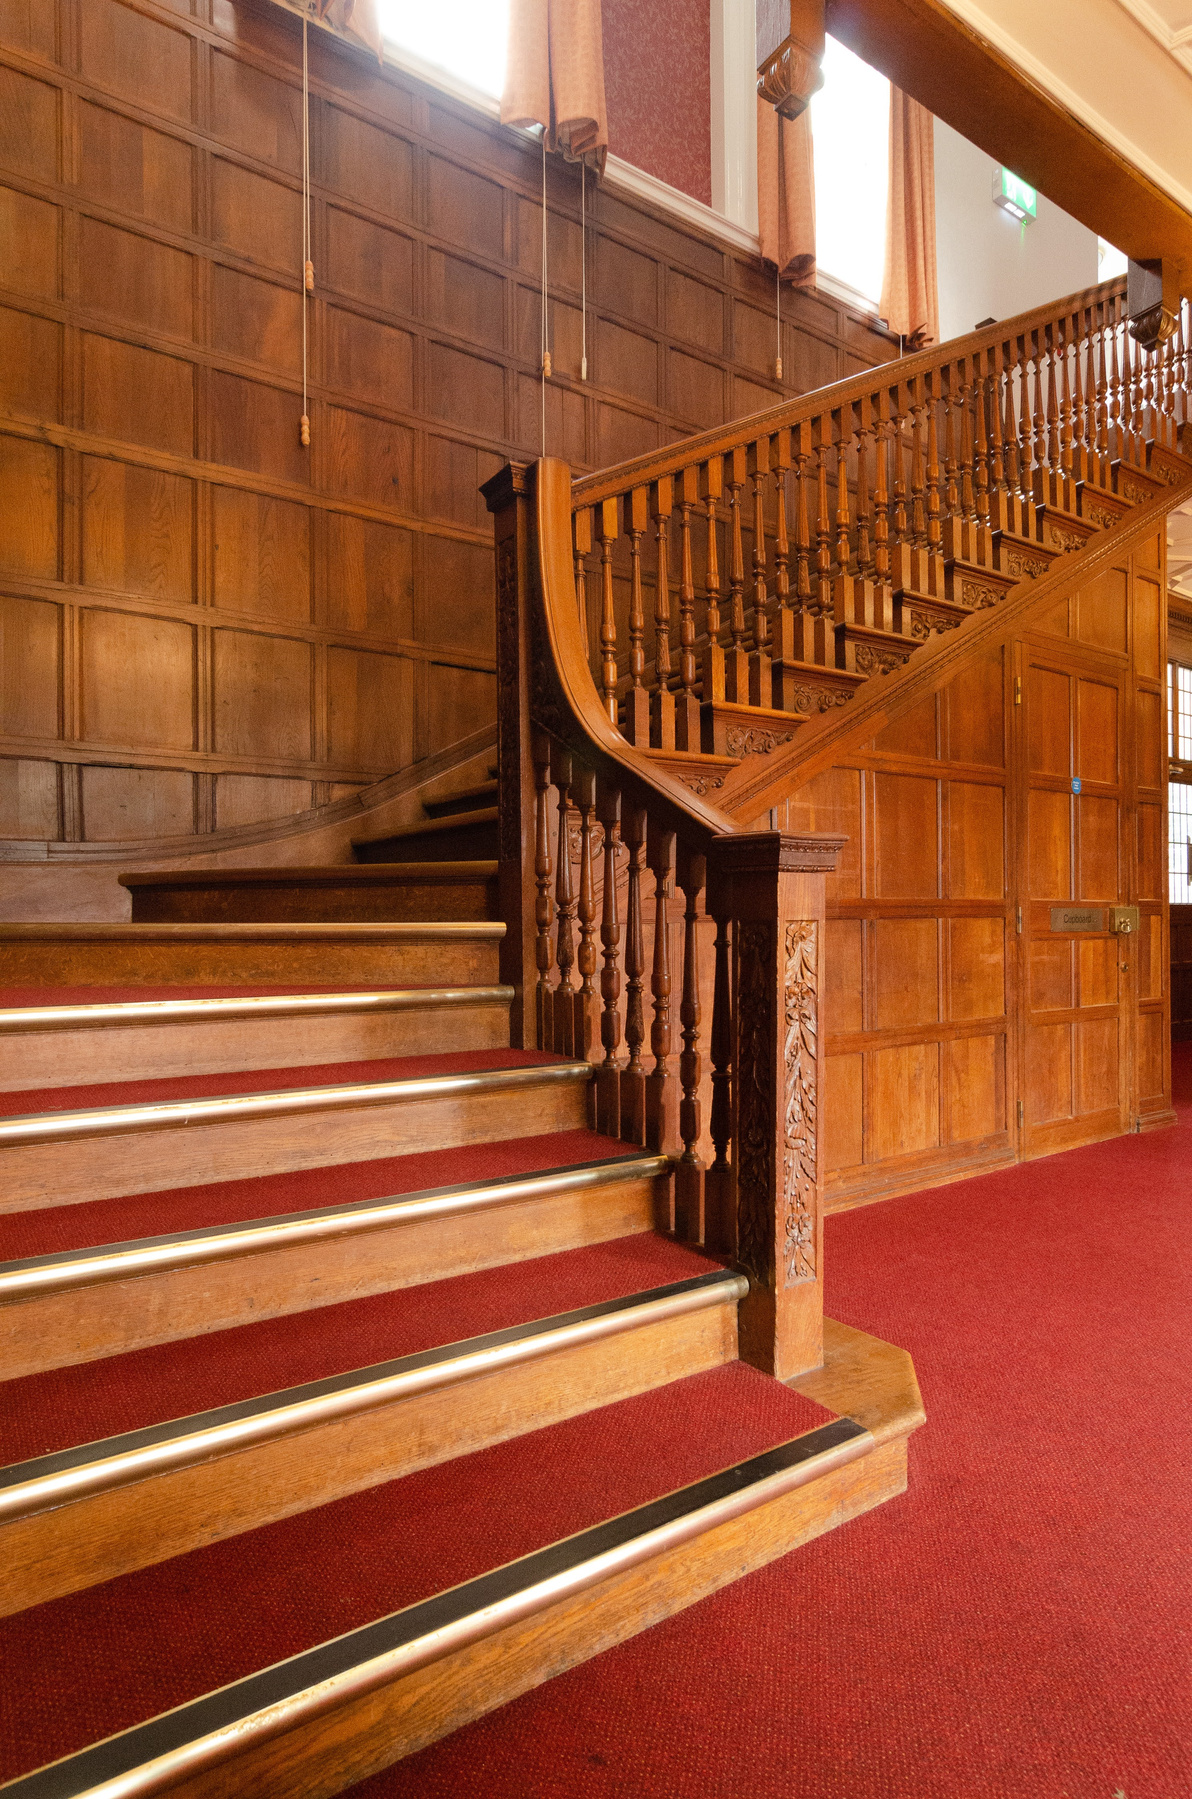 ornate wooden stairs in a large room with a deep red carpet